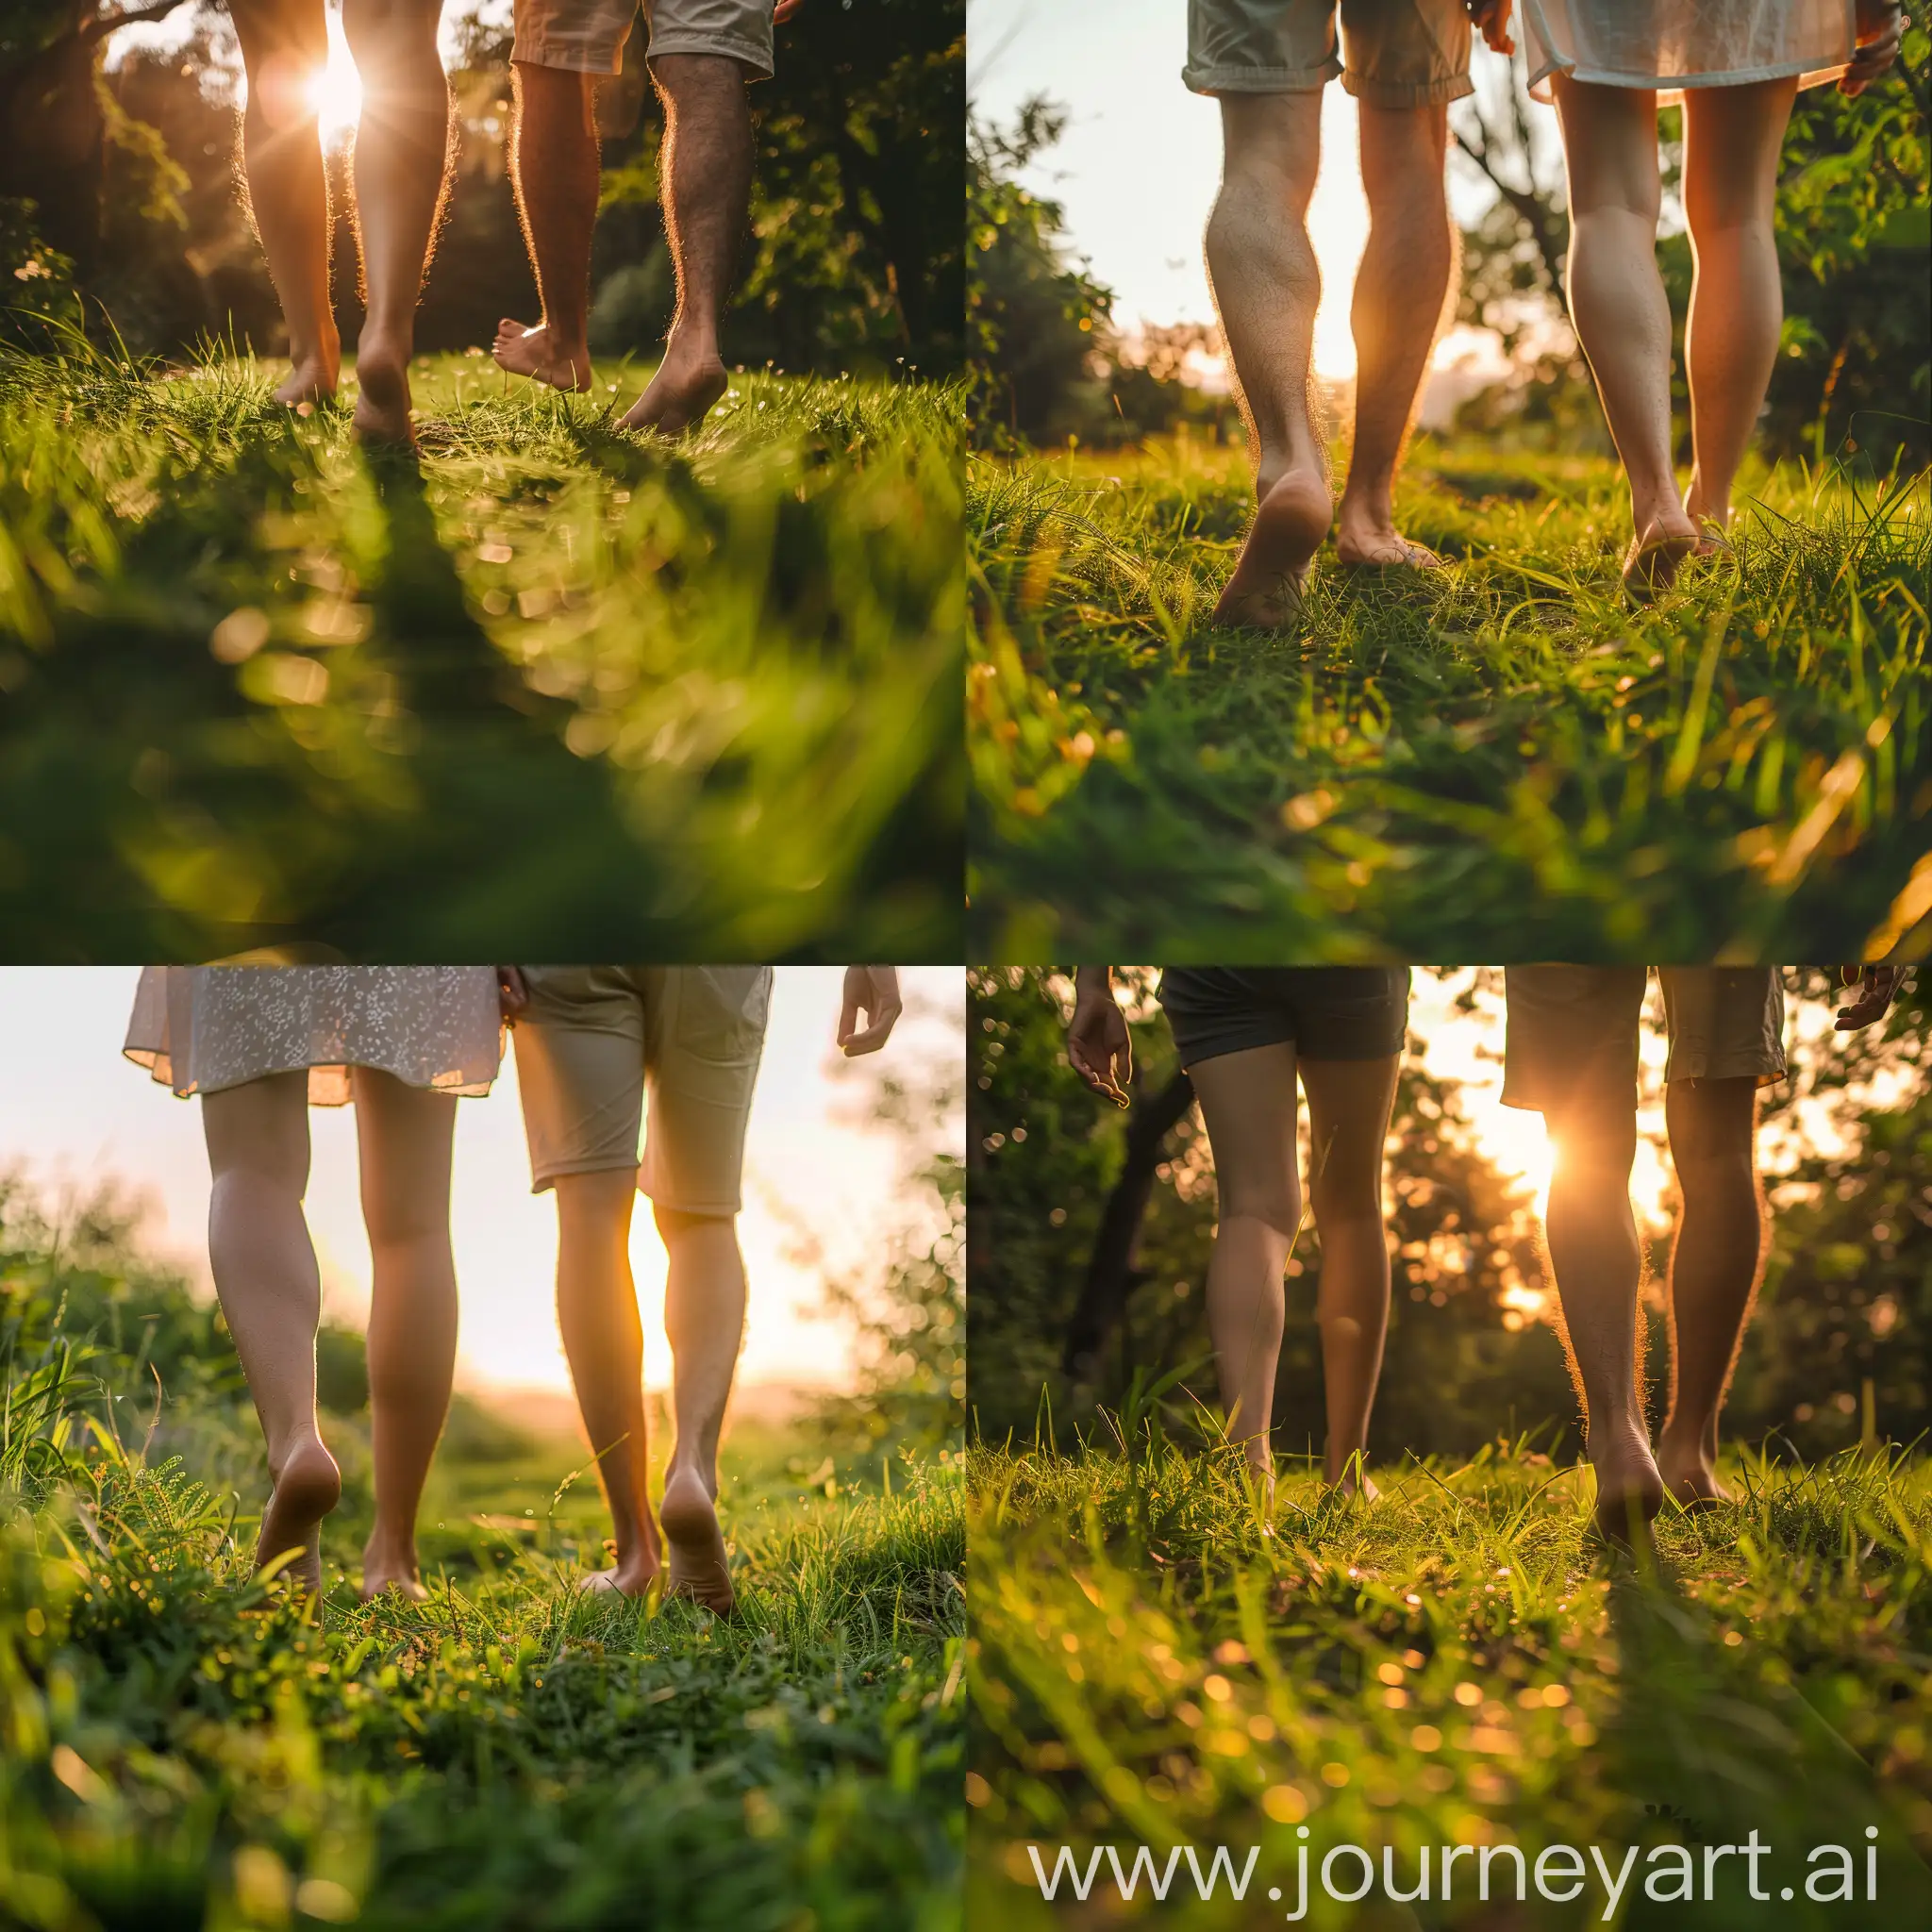 Barefoot-Couple-Grounding-in-Lush-Meadow-at-Sunset